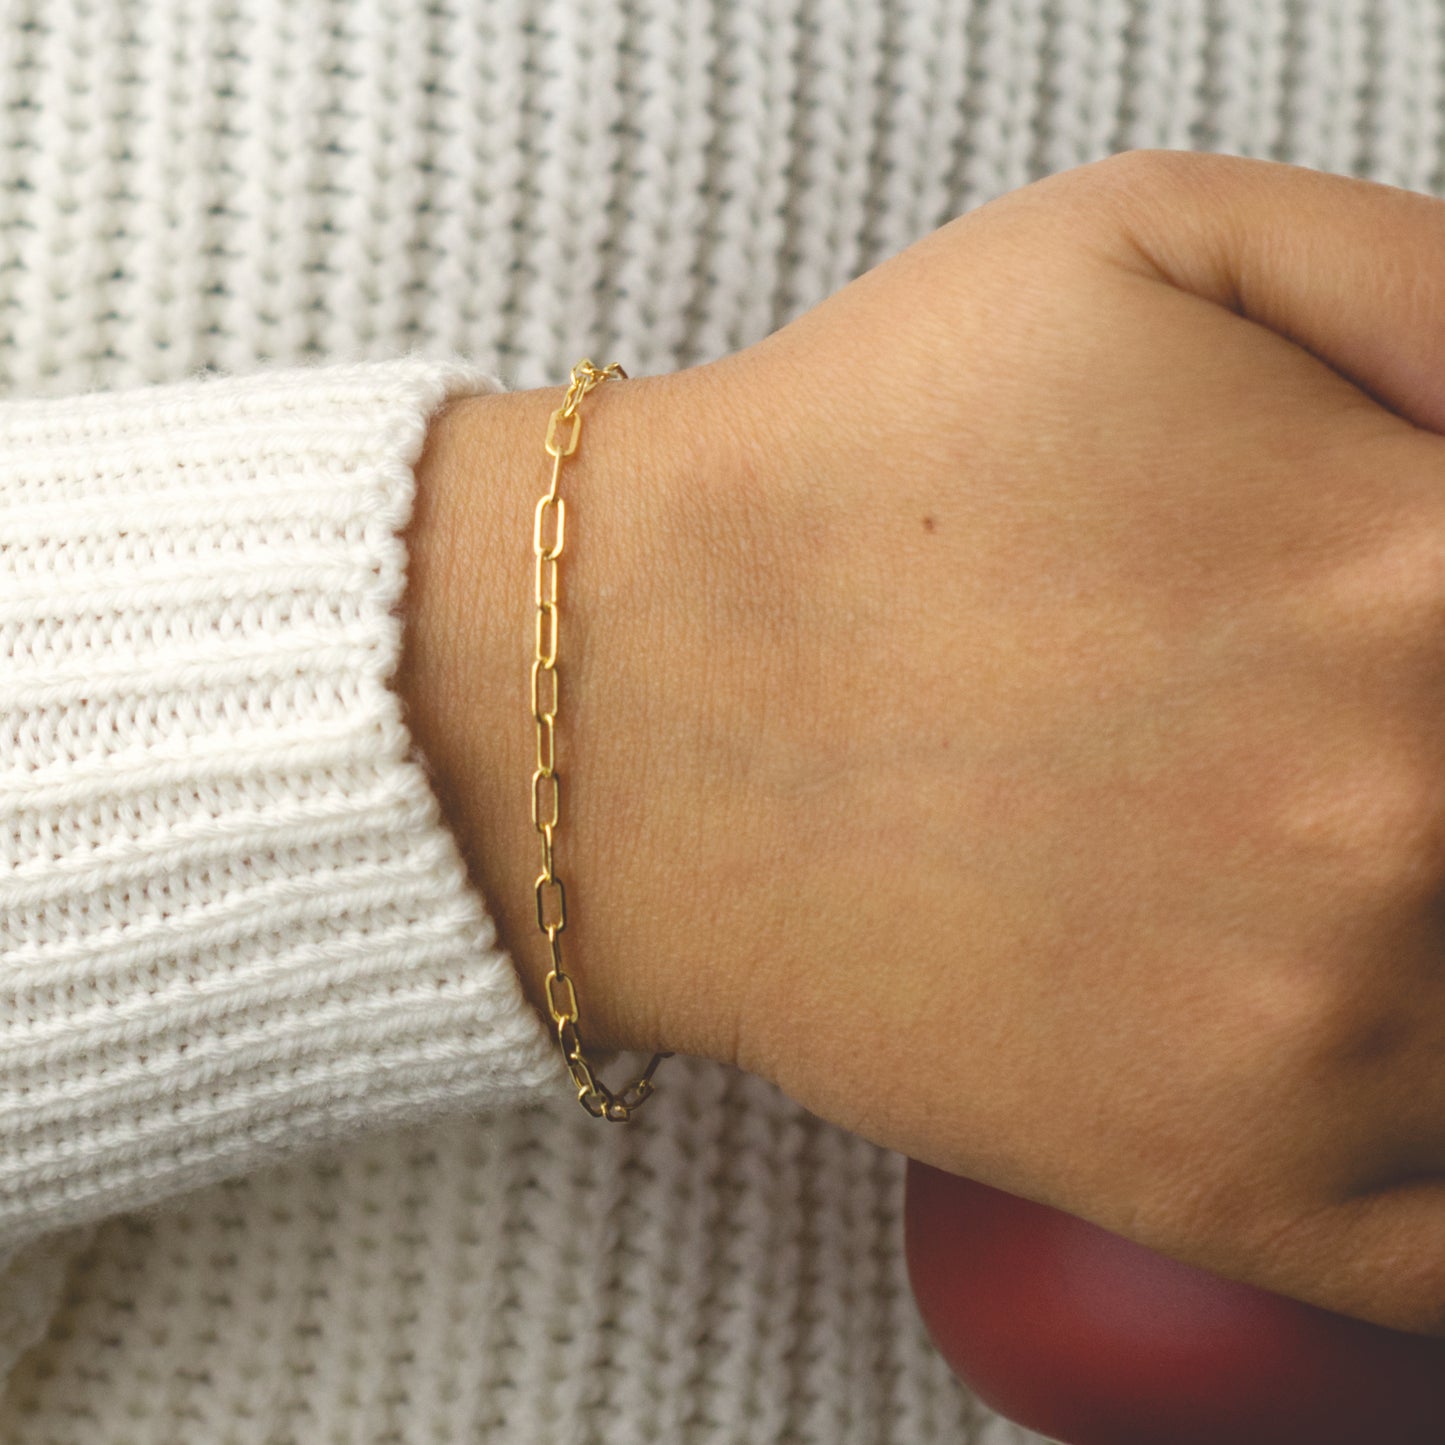 Woman wearing a 14K gold fill paperclip chain bracelet with a dainty style (medium) link size